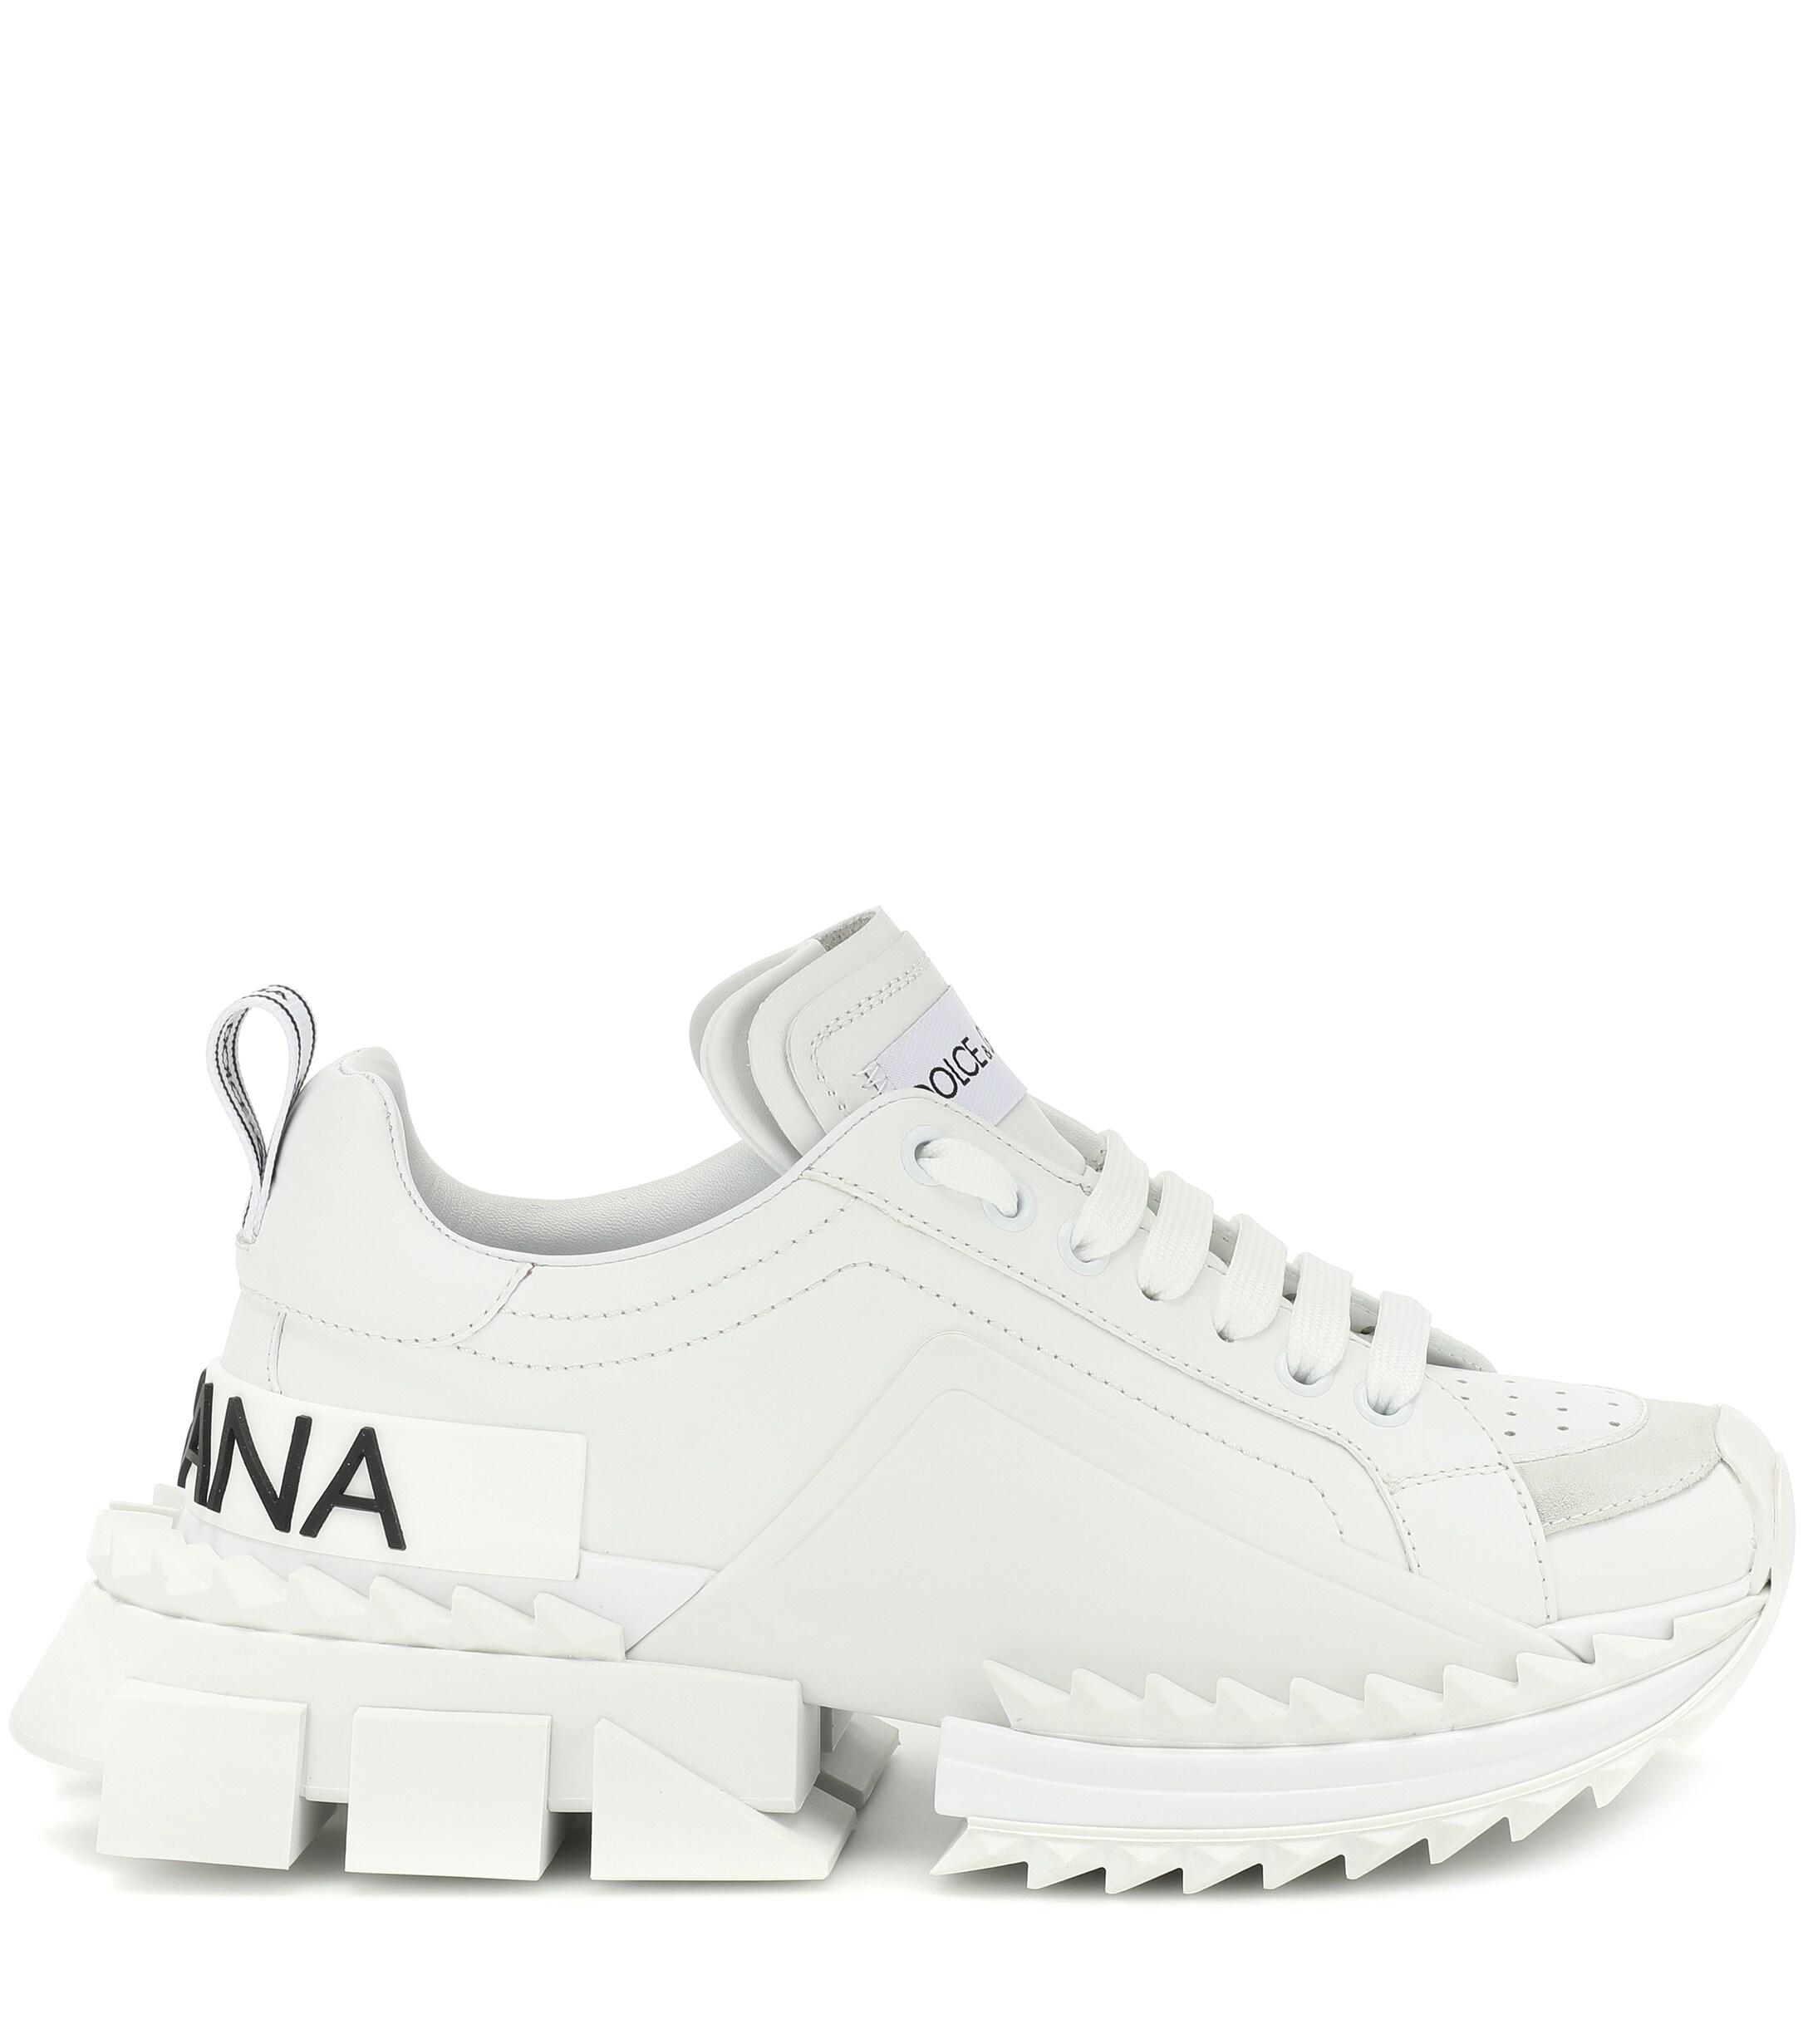 Dolce & Gabbana Super Queen Leather Sneakers in White,White (White) - Lyst